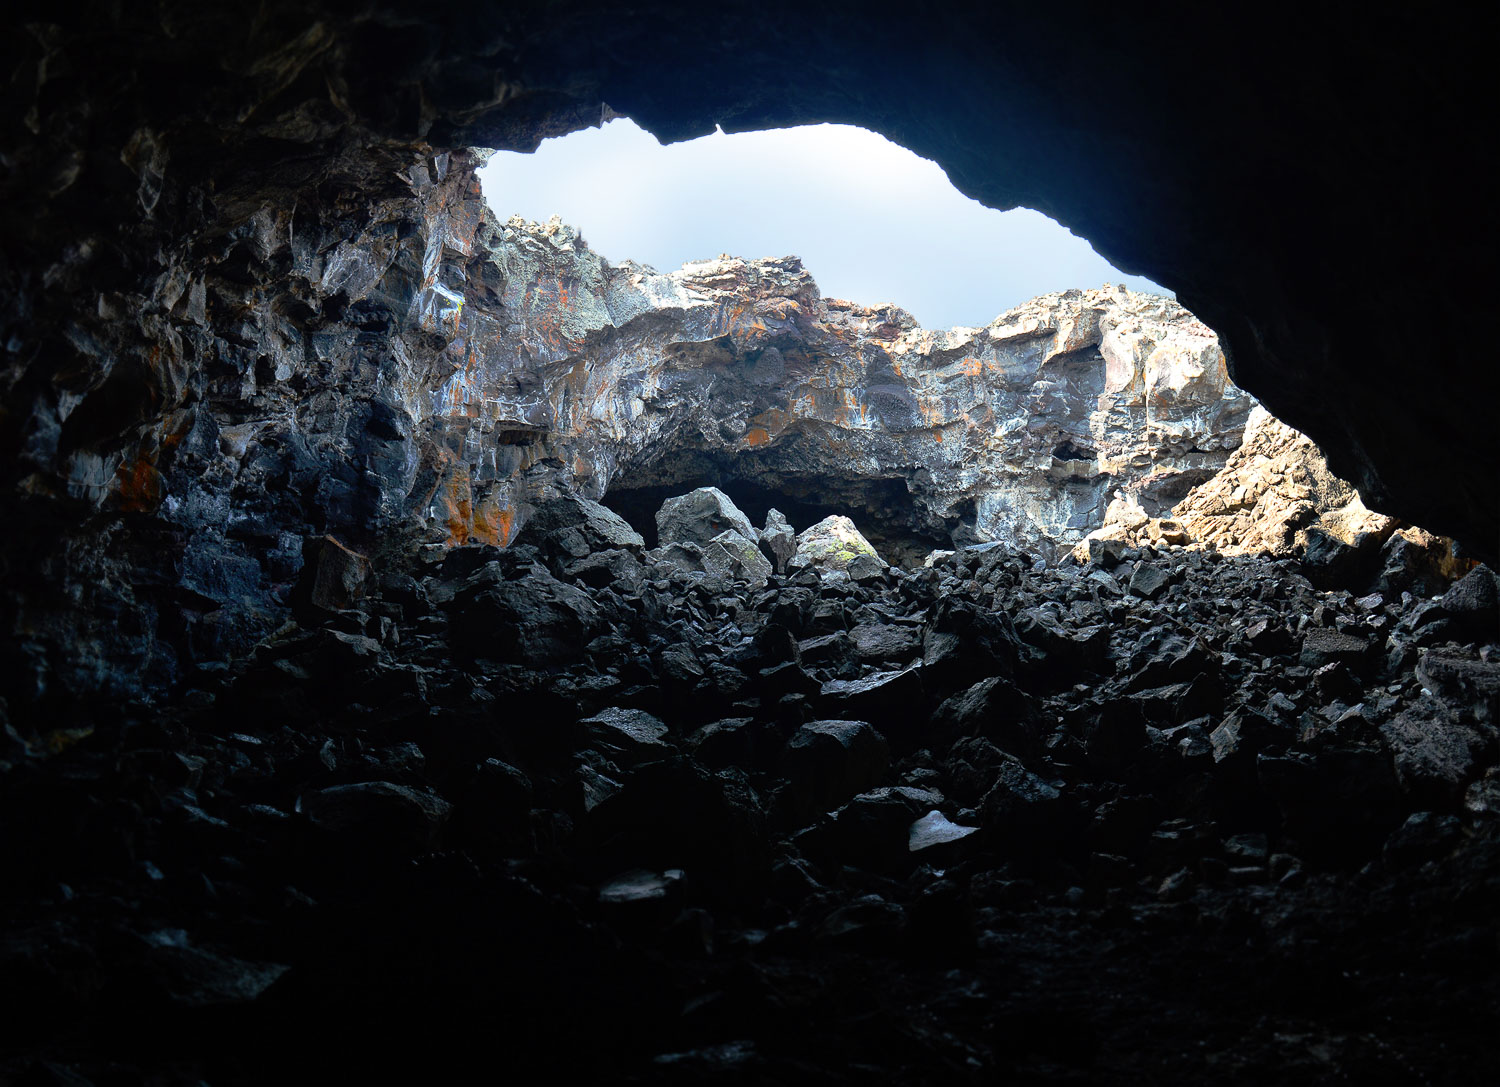 Dark caves in Craters of the Moon National Monument